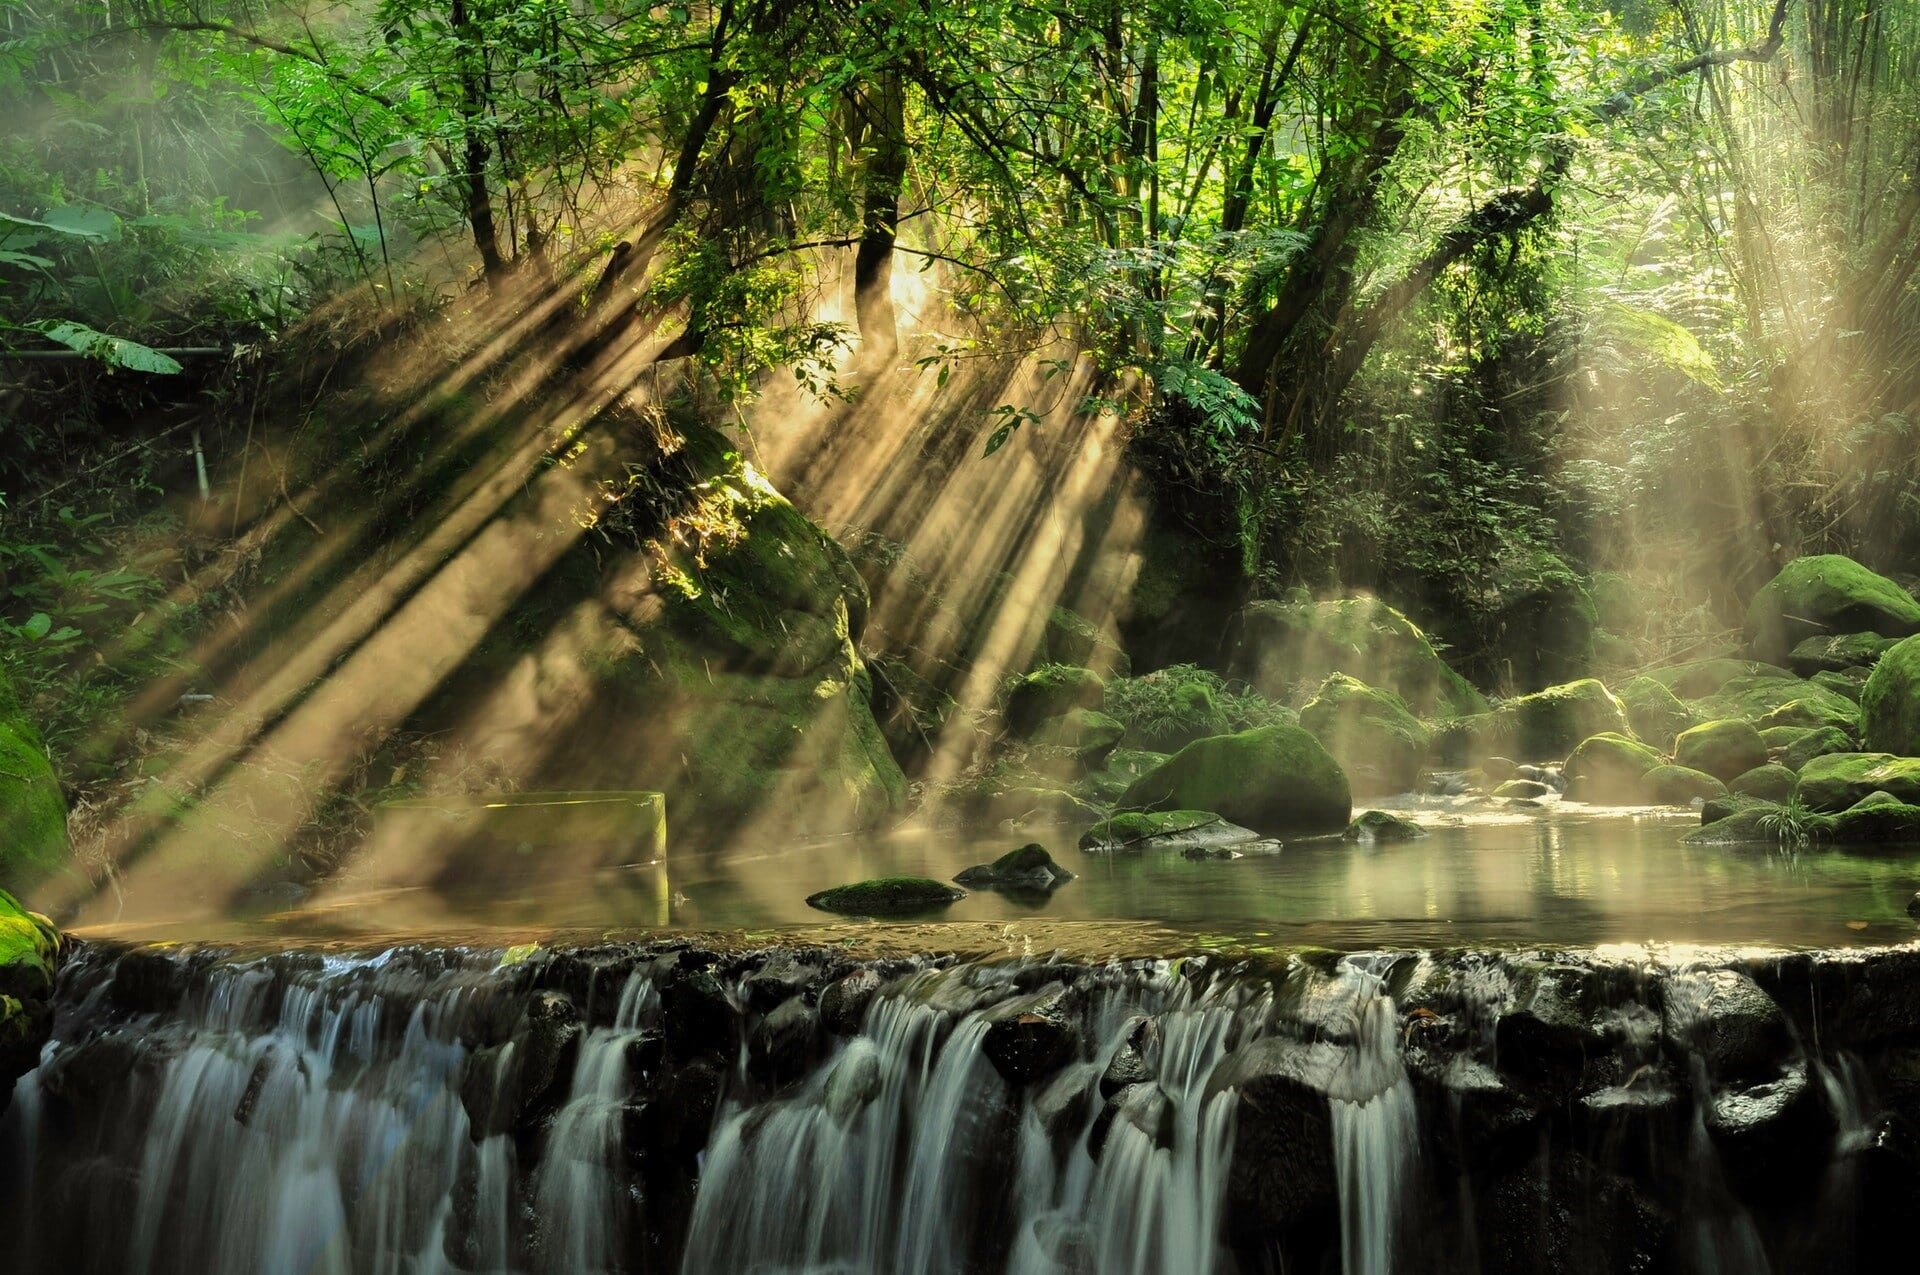 Image: Light streaming through the rainforest canopy to a waterfall